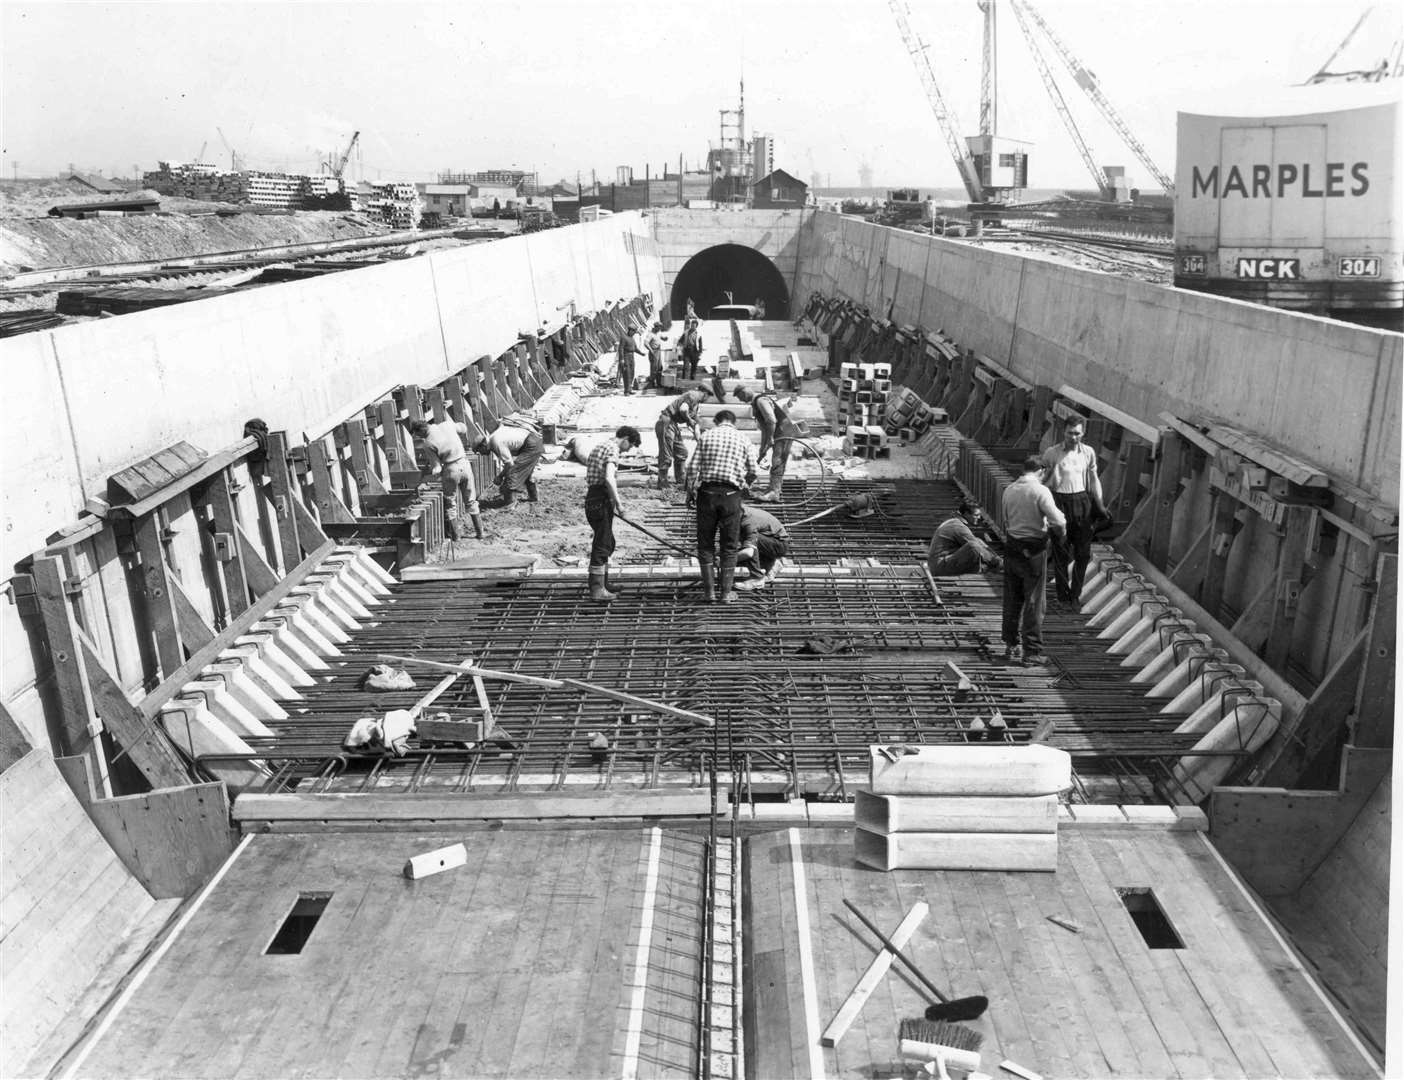 The Dartford Tunnel pictured under construction during the early stages of building in 1959. It opened to traffic four years later